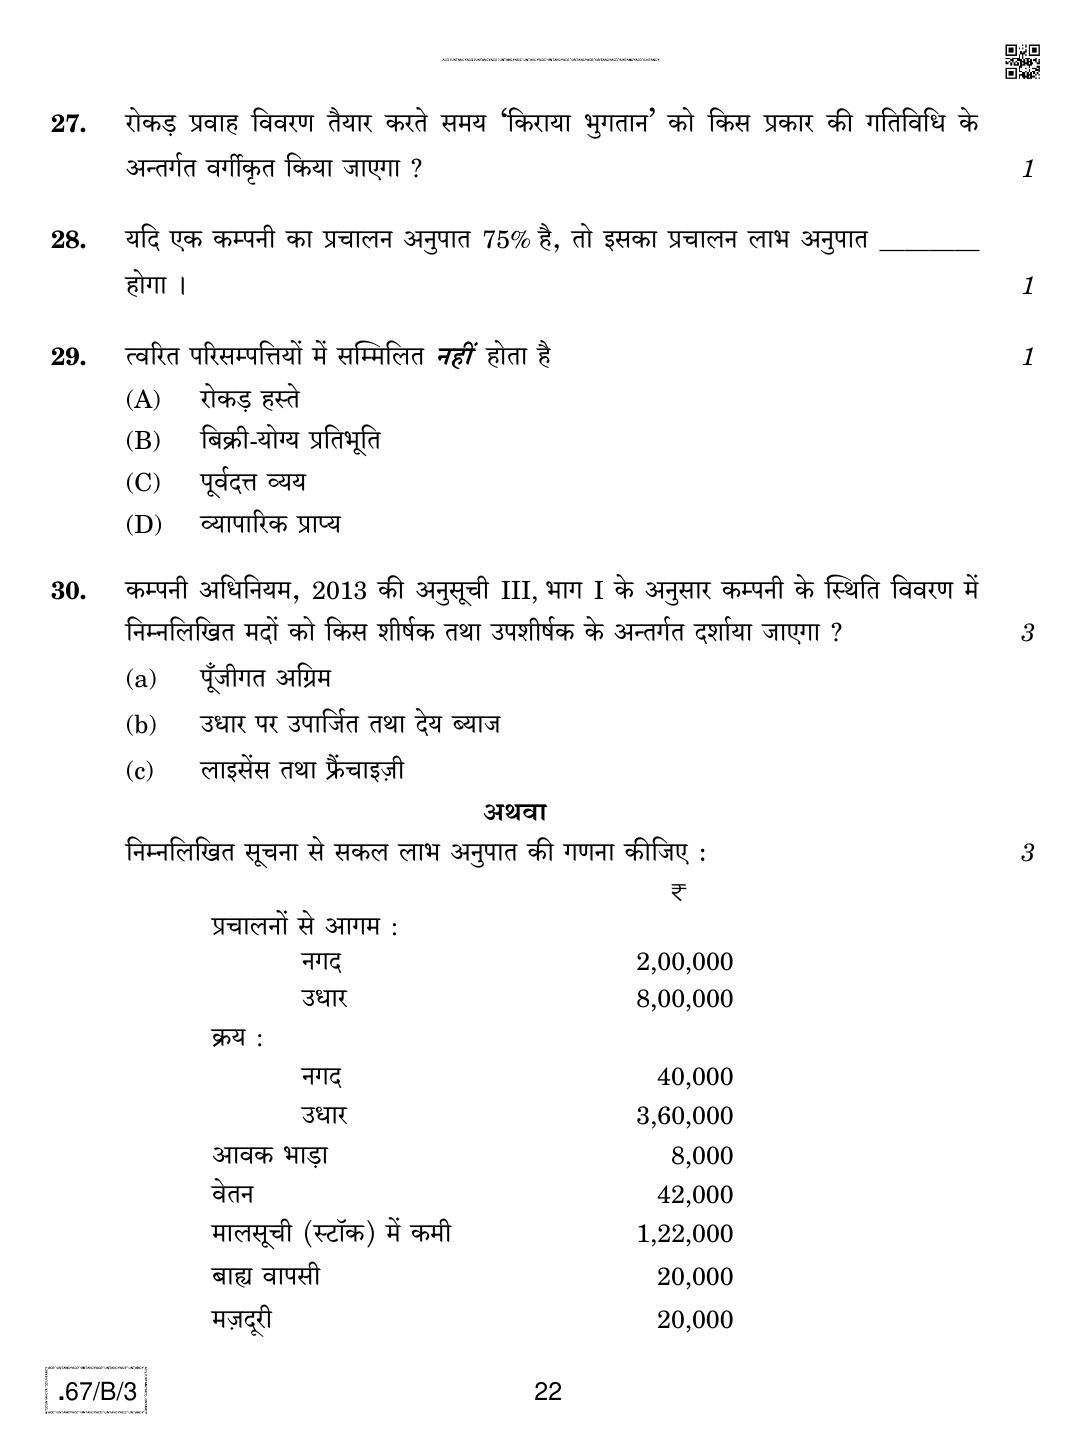 CBSE Class 12 67-C-3 - Accountancy 2020 Compartment Question Paper - Page 22